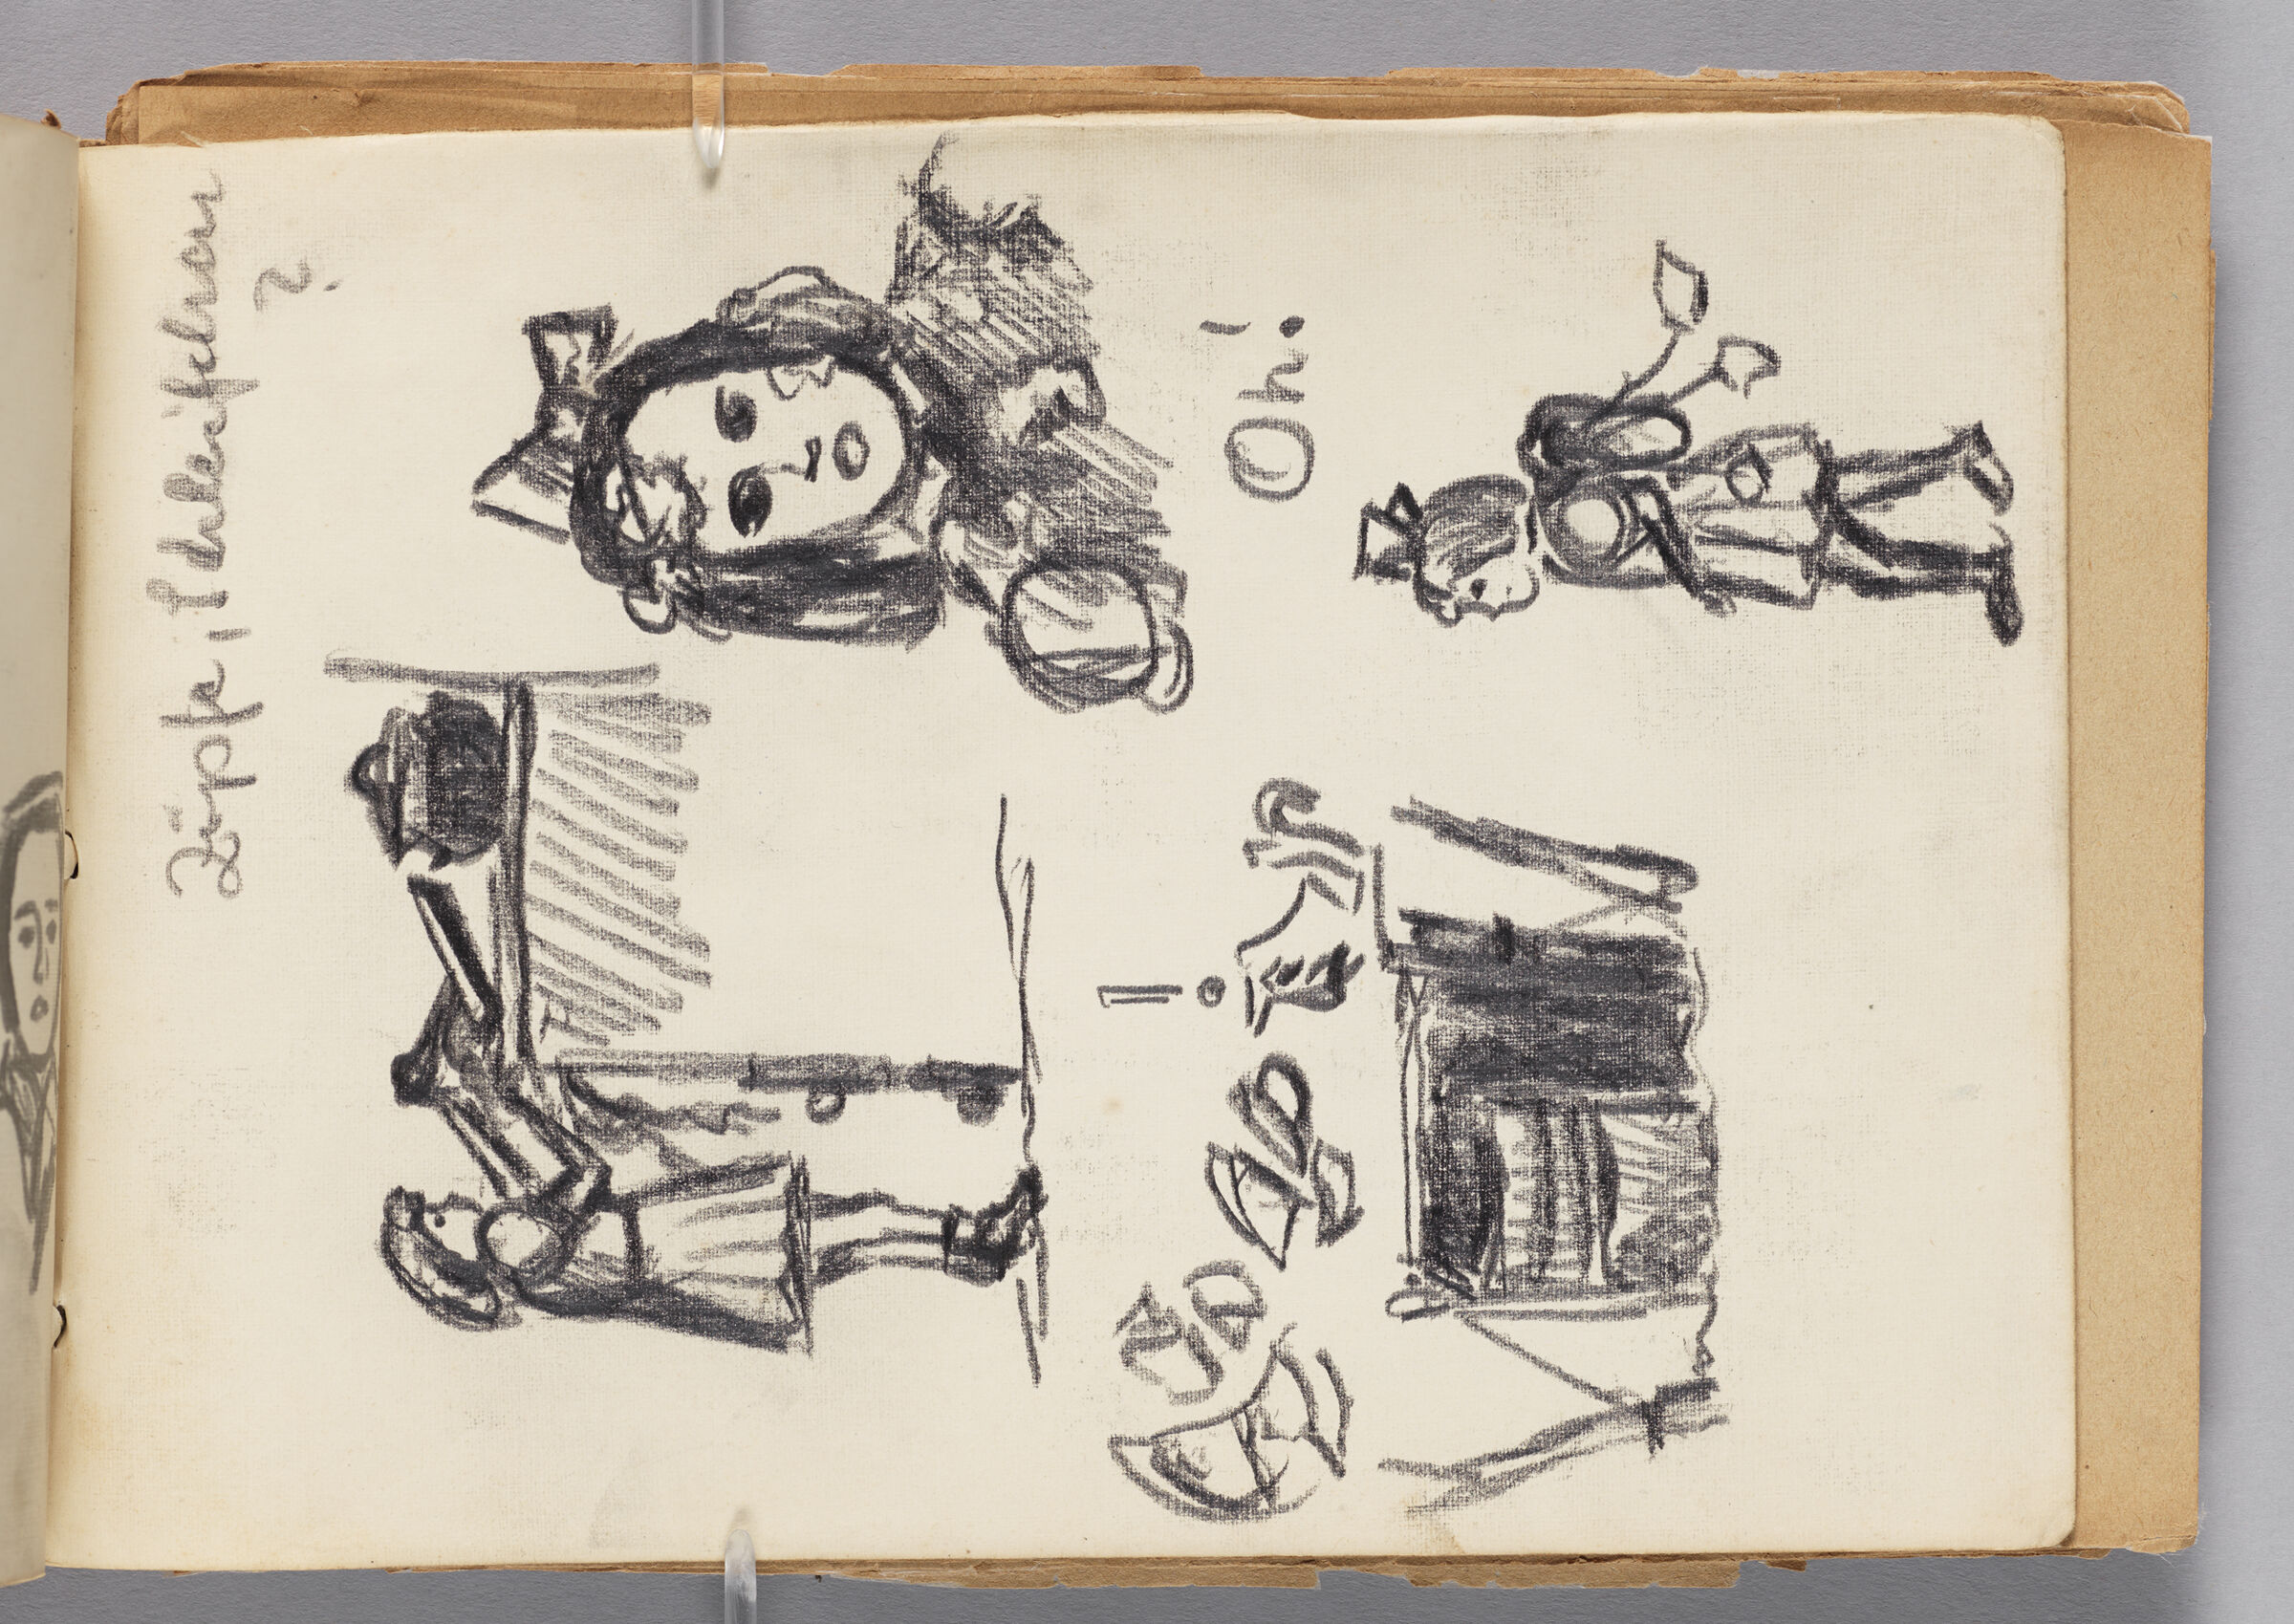 Untitled (Sketches Of School Scenes, Left Page); Untitled (Sketches Of Girl, Right Page)